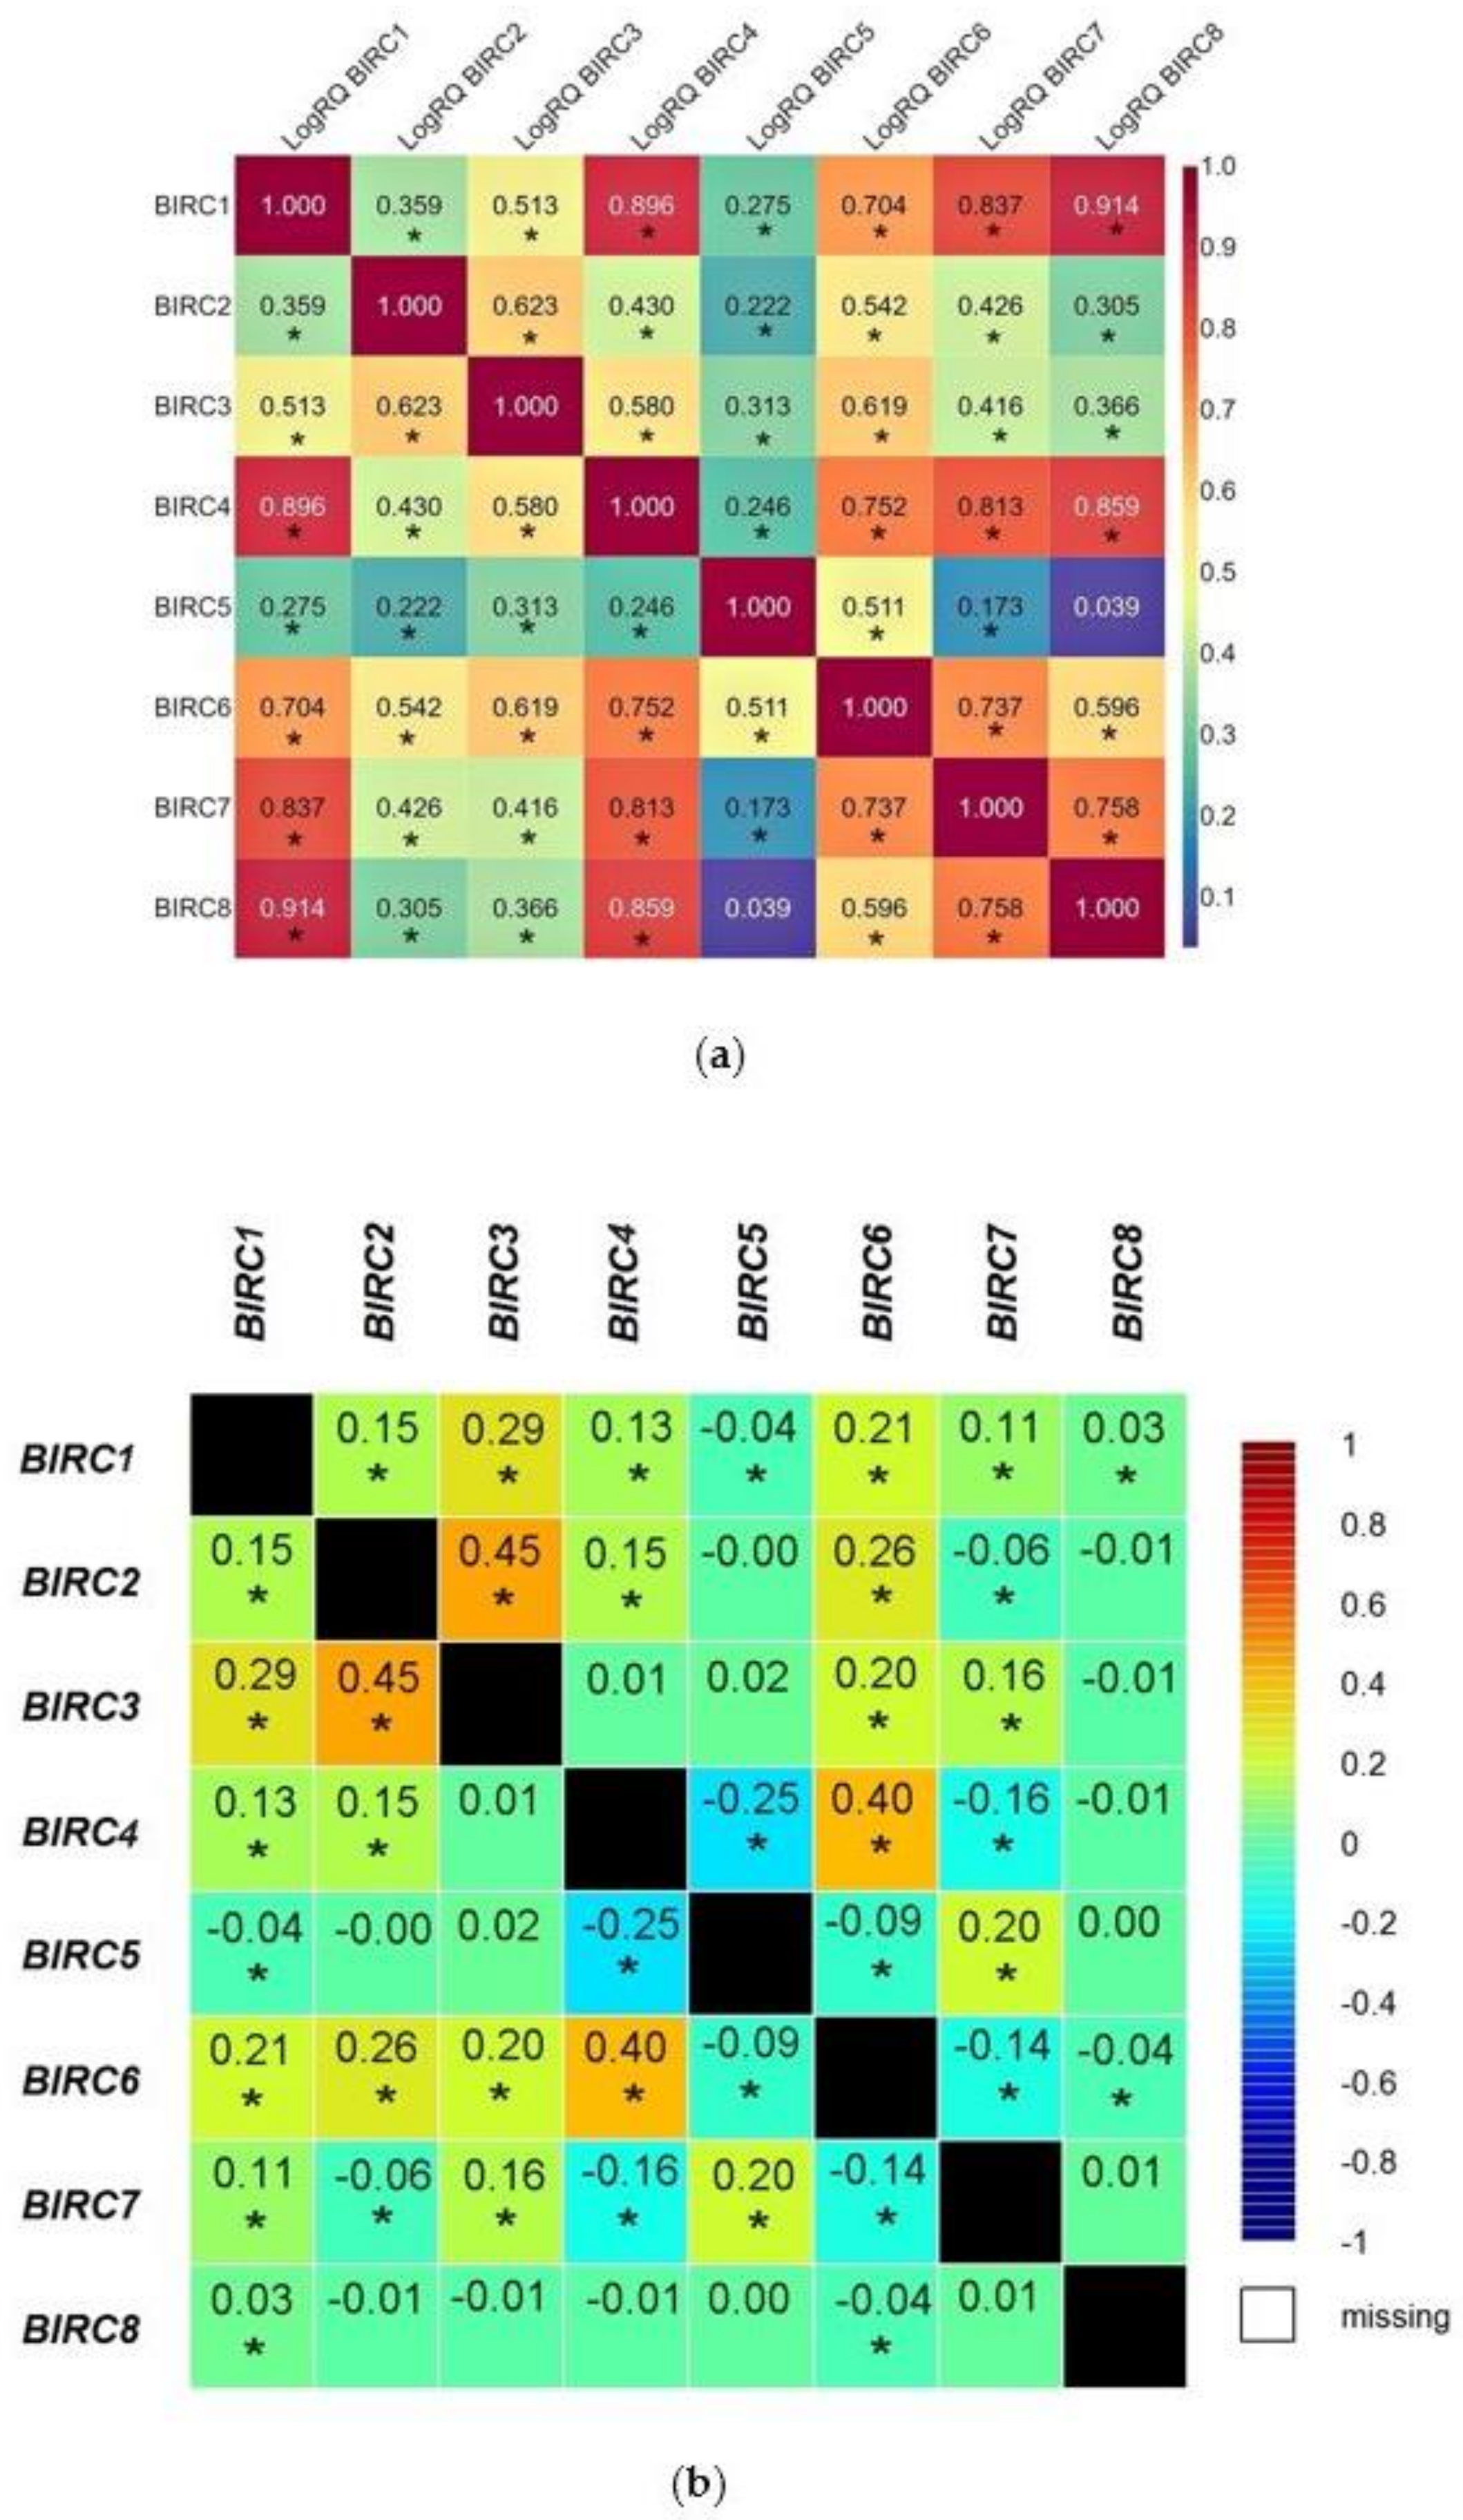 Ijms Free Full Text The Birc Family Genes Expression In Patients With Triple Negative Breast Cancer Html